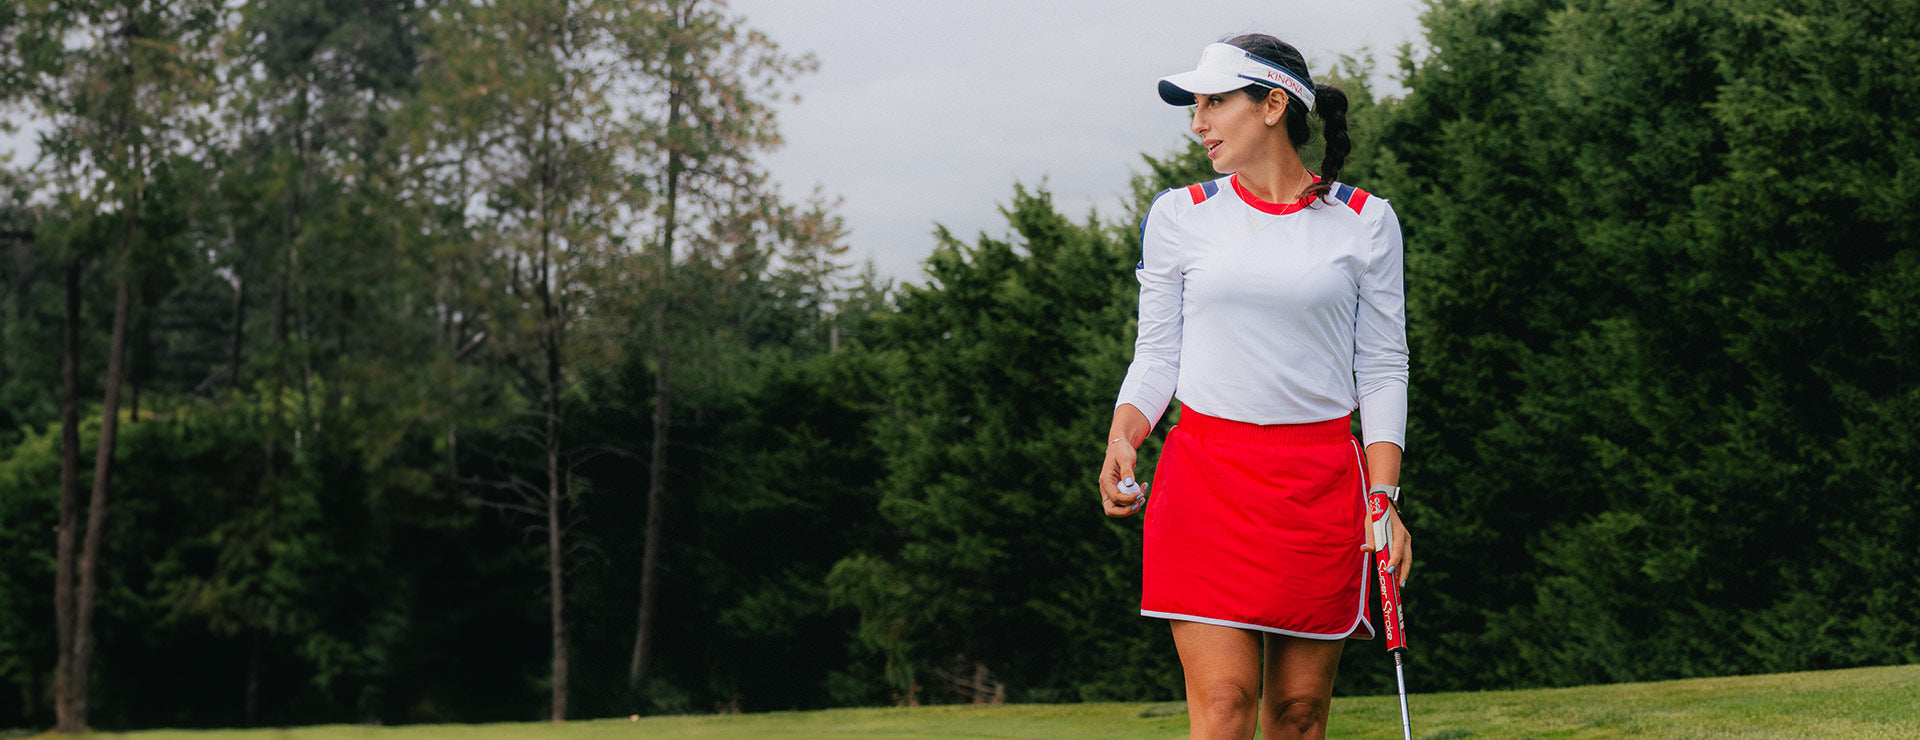 RETRO MEETS CHIC IN KINONA'S LATE SUMMER WOMEN'S GOLF APPAREL COLLECTION -  The Golf Wire